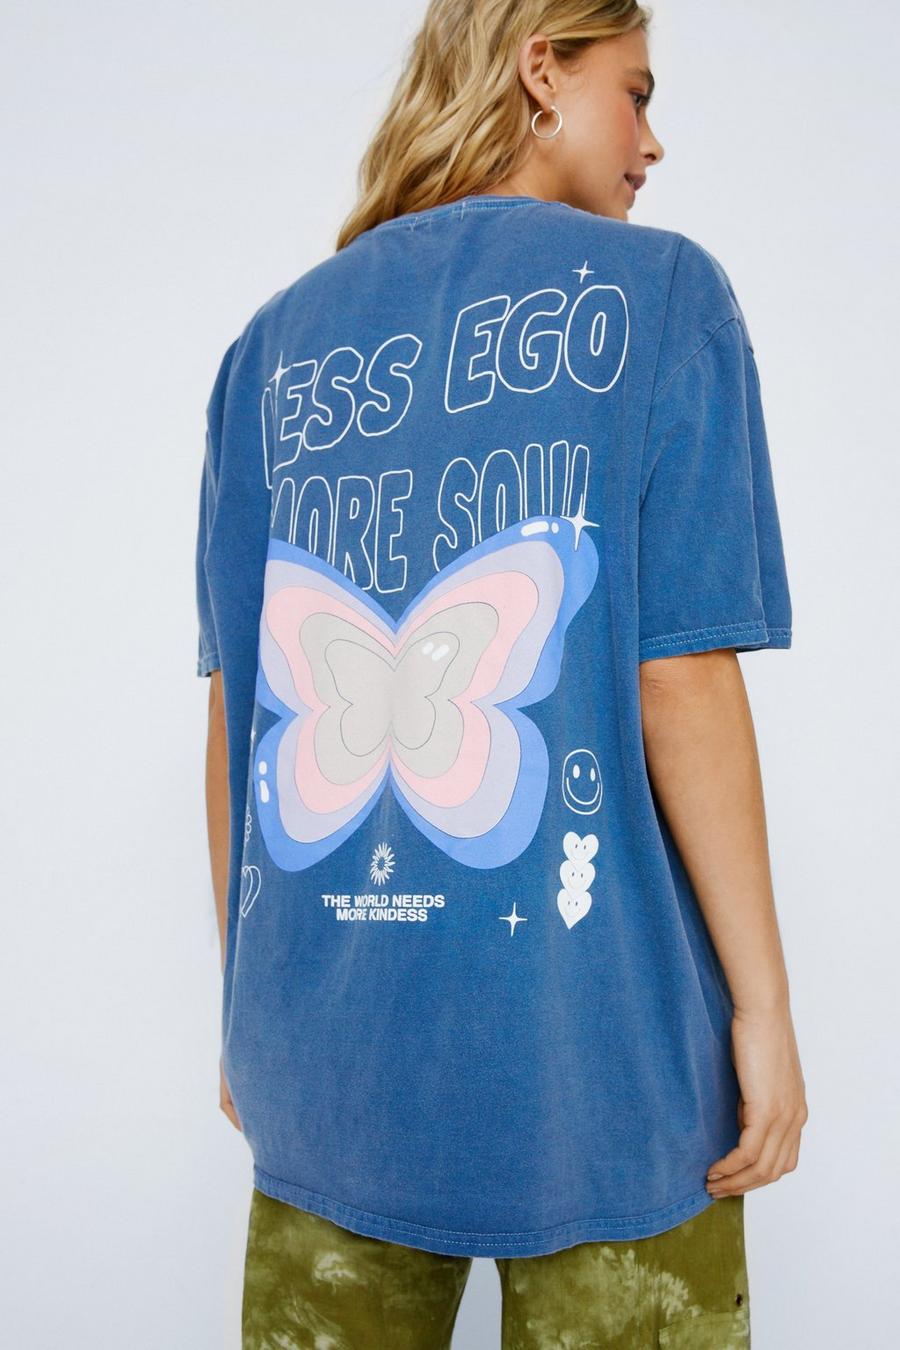 Less Ego More Soul Graphic T-shirt